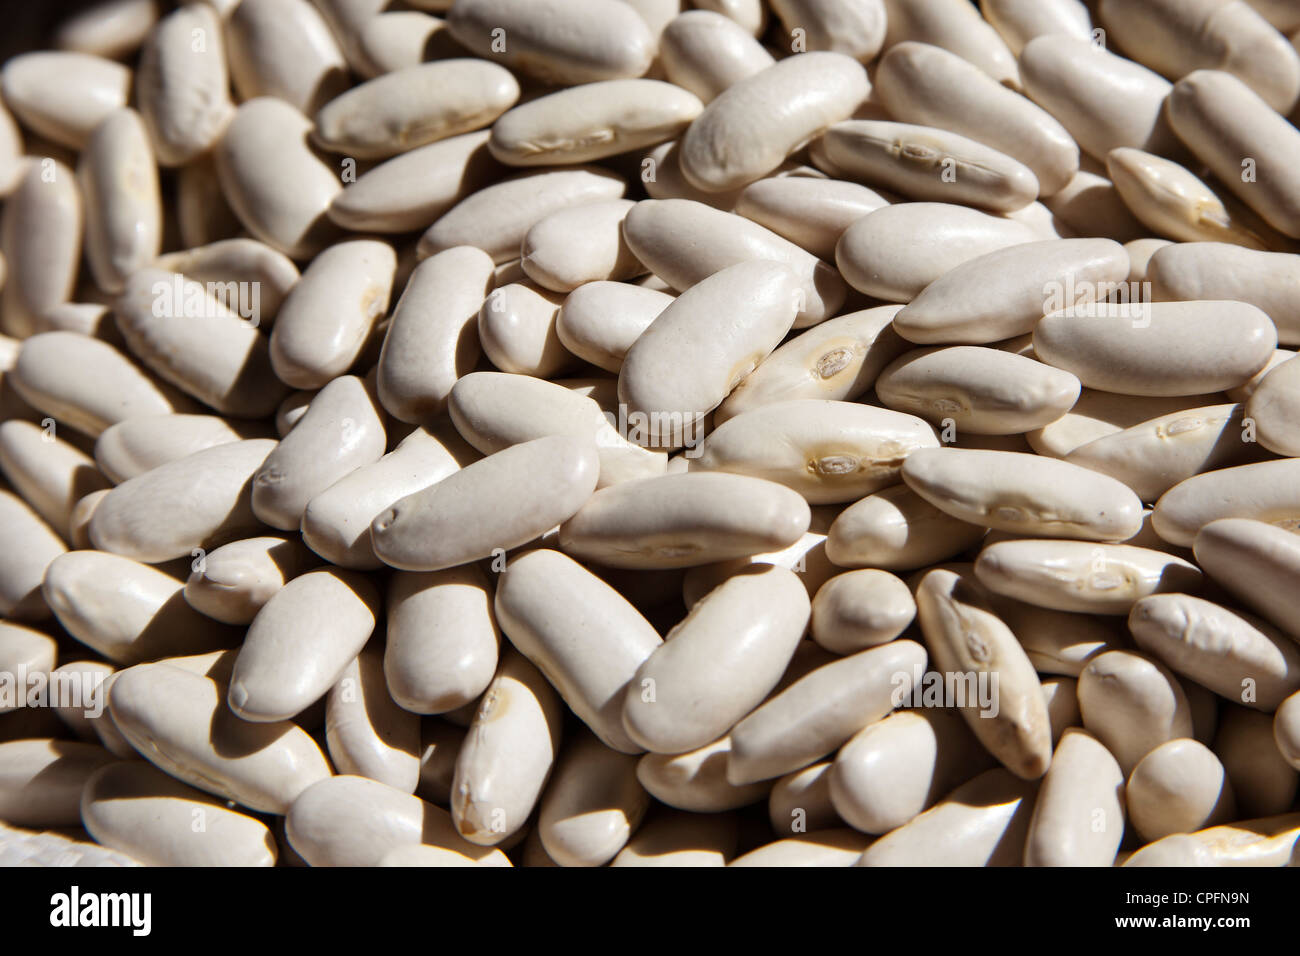 Beans in a market Stock Photo